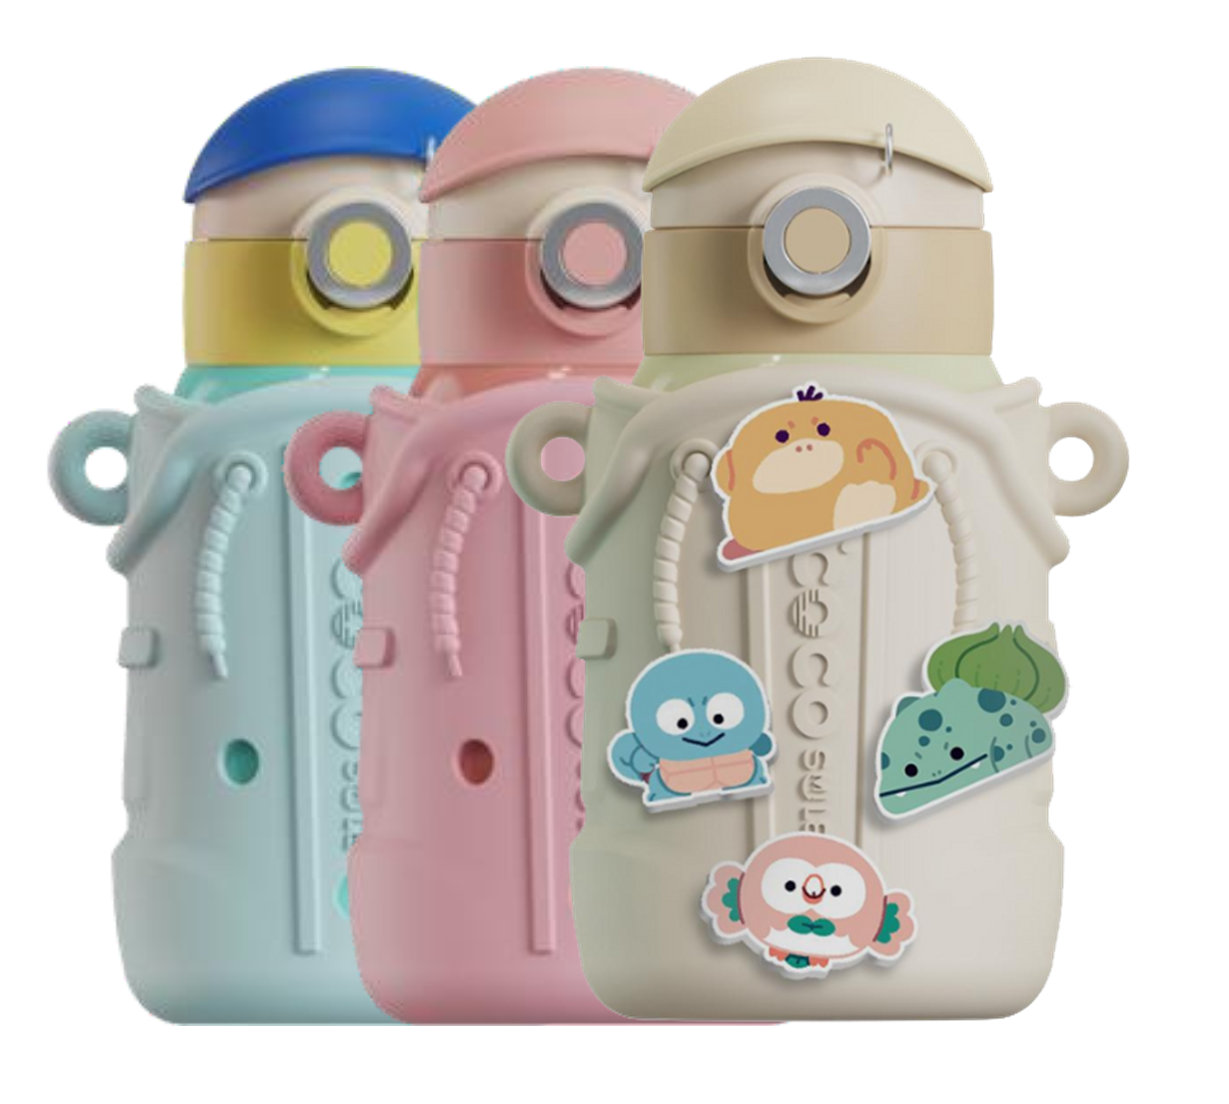  Cocosmile cups are the new must-have drinking accessory for kids! Learn more about the benefits and features of these innovative cups and why they're the perfect choice for your little ones.